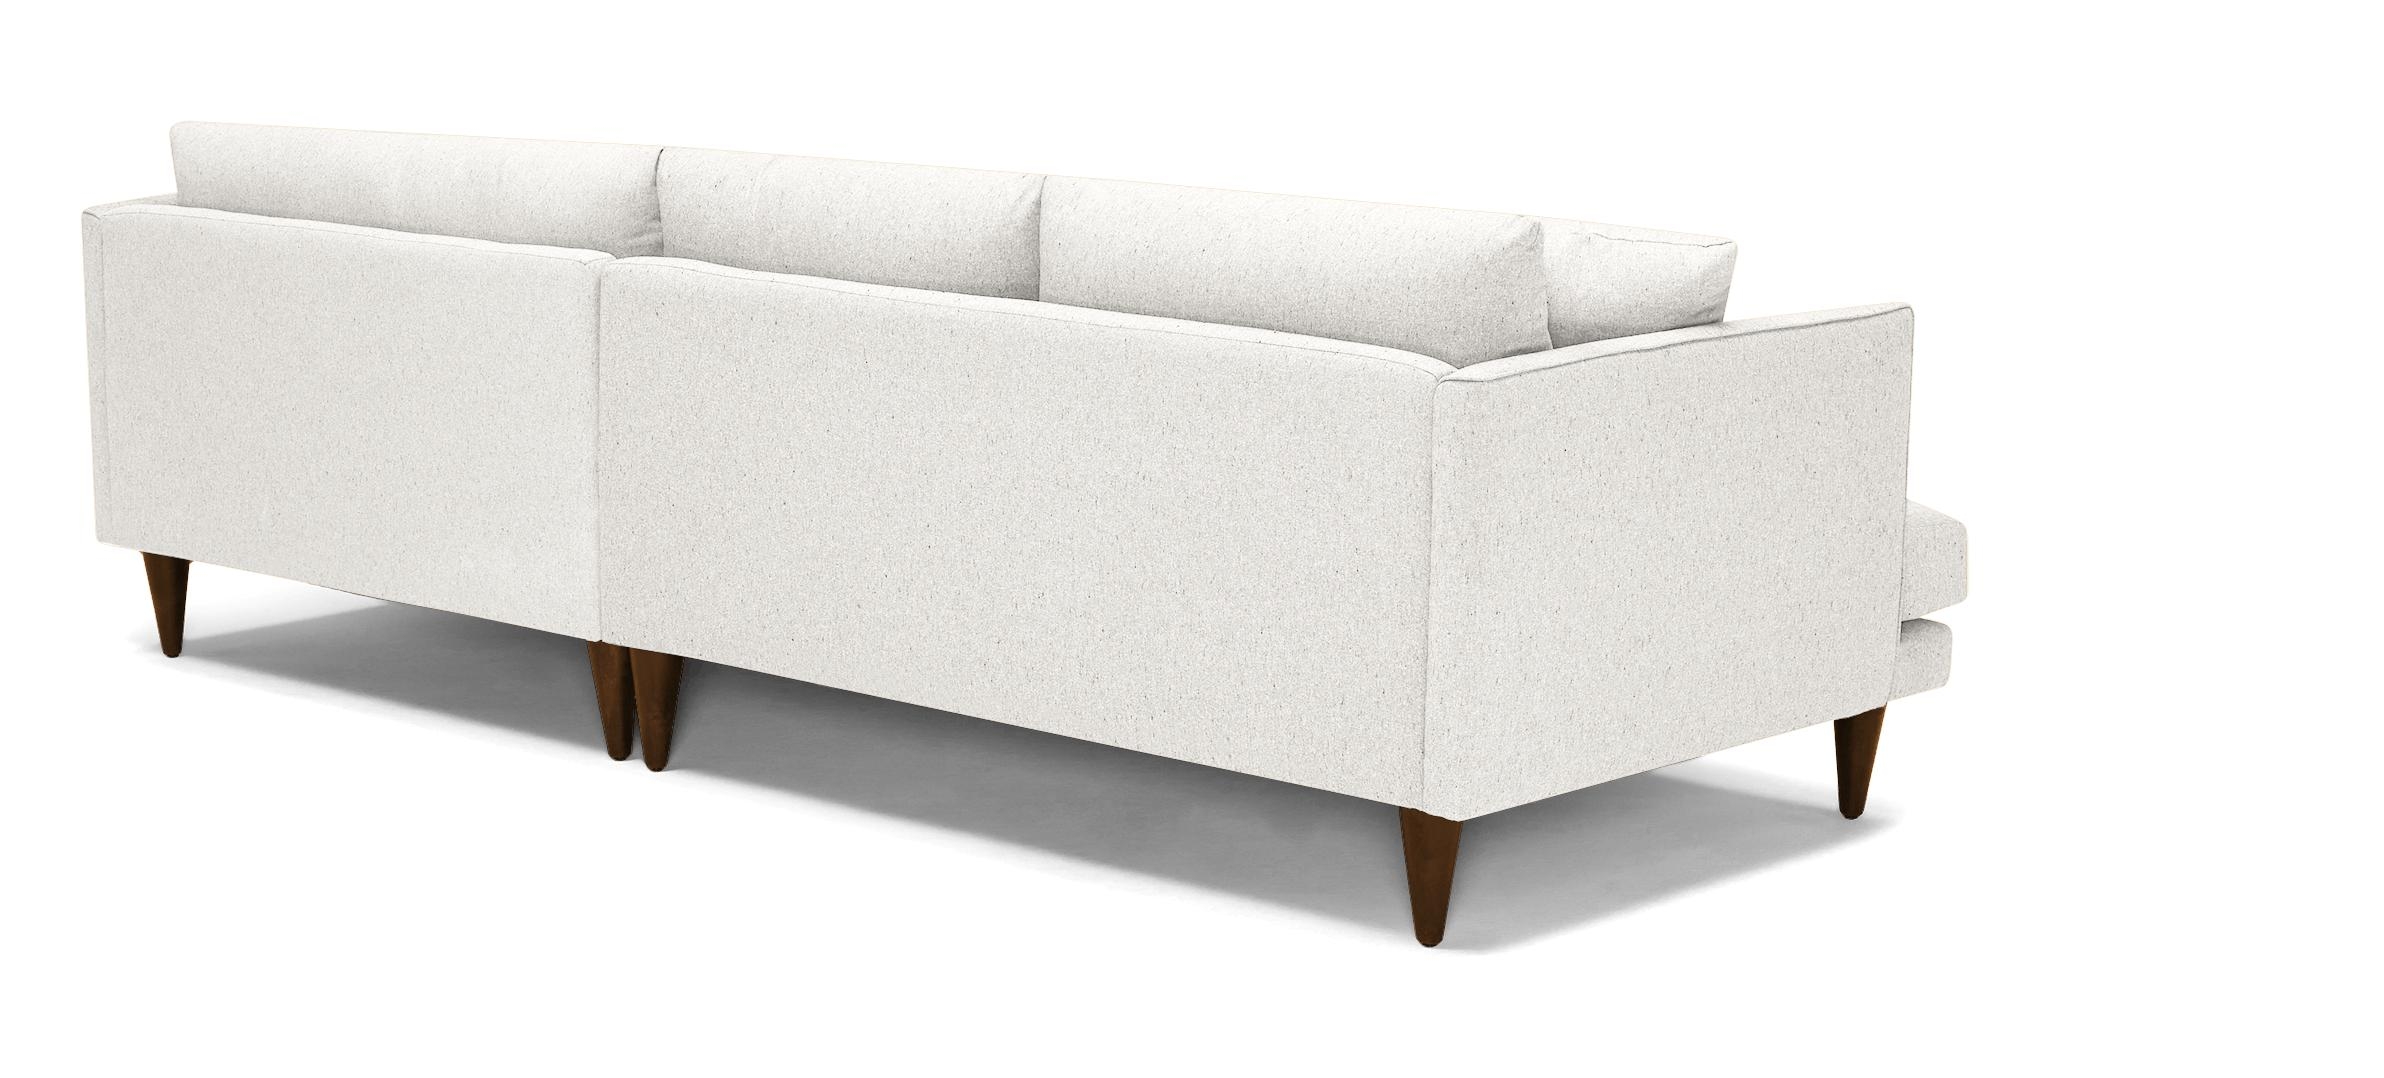 White Lewis Mid Century Modern Sectional - Tussah Snow - Mocha - Right - Cone - Image 3